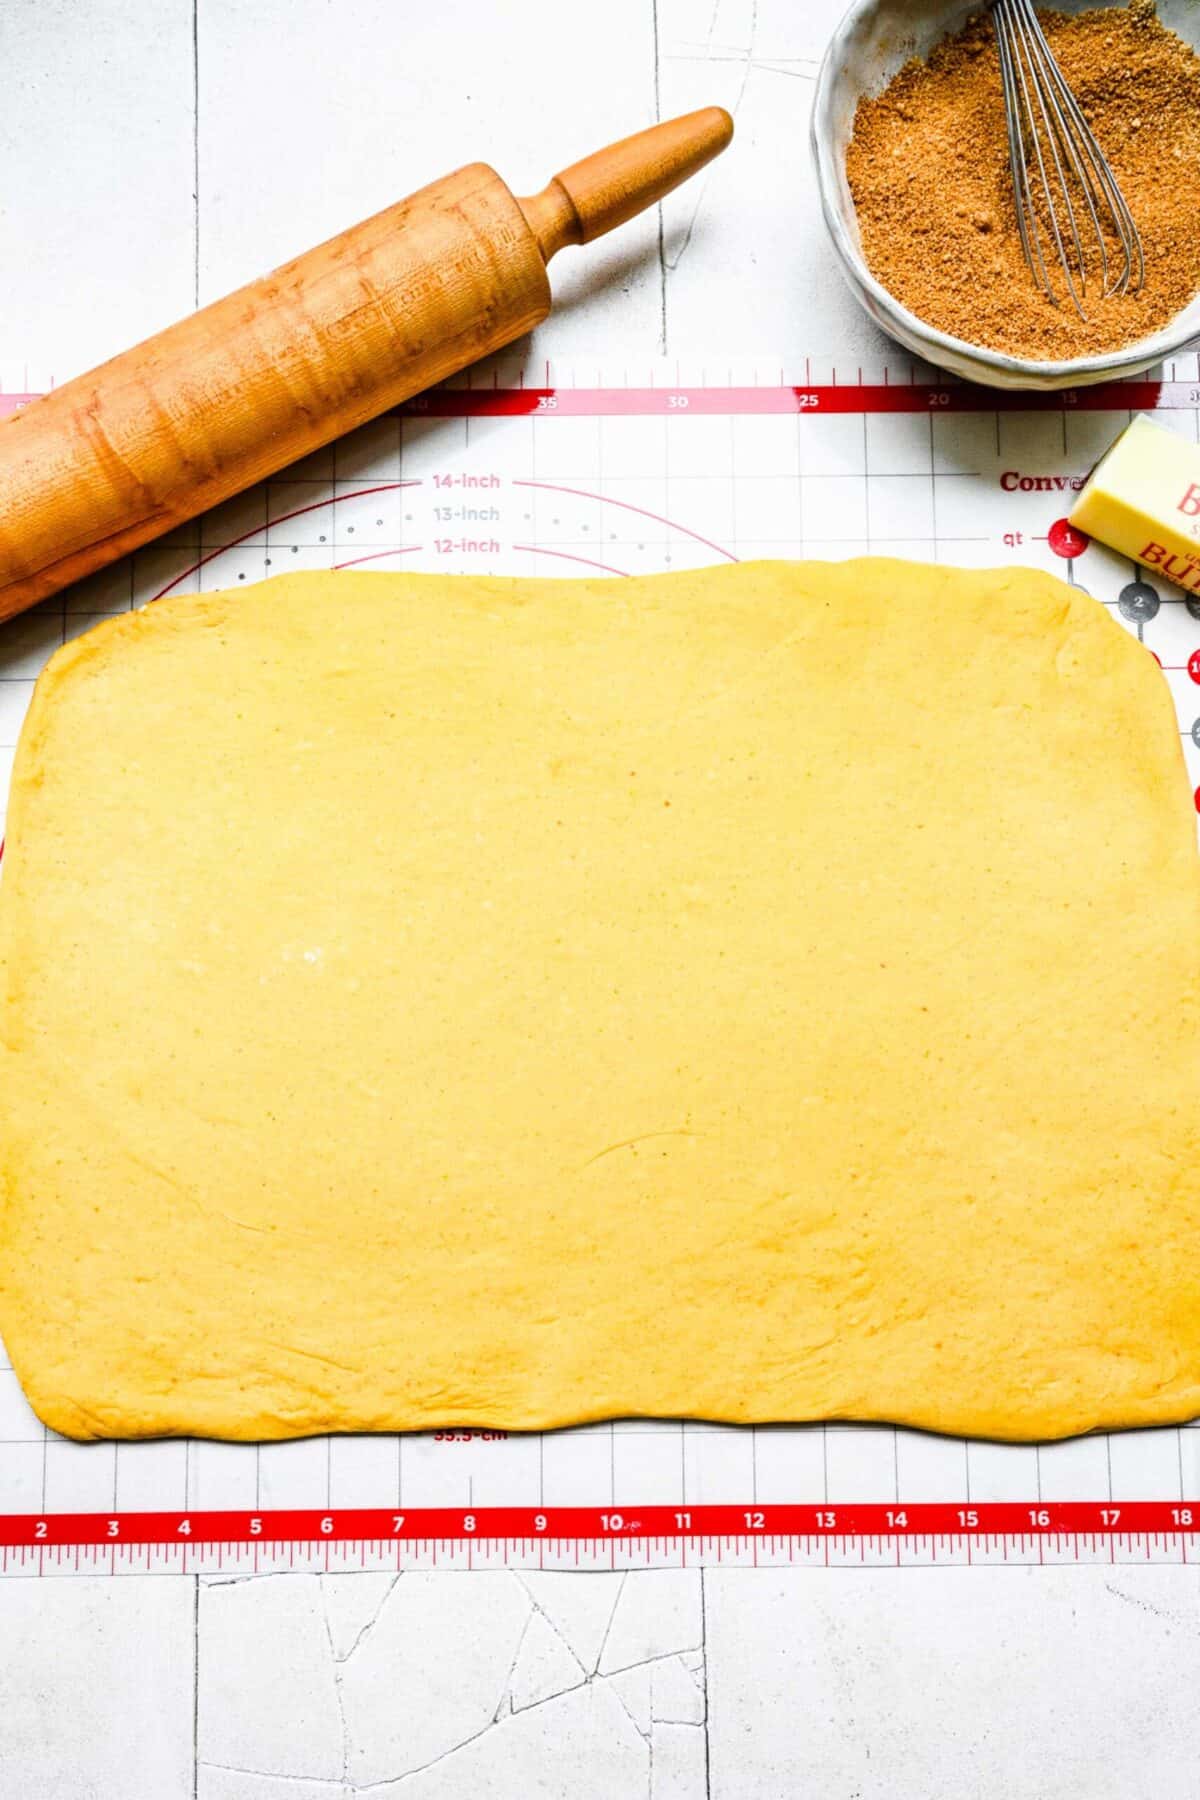 A rectangle of pumpkin cinnamon roll dough on a ruler mat, next to a rolling pin, a stick of butter, and a bowl of spice mixture